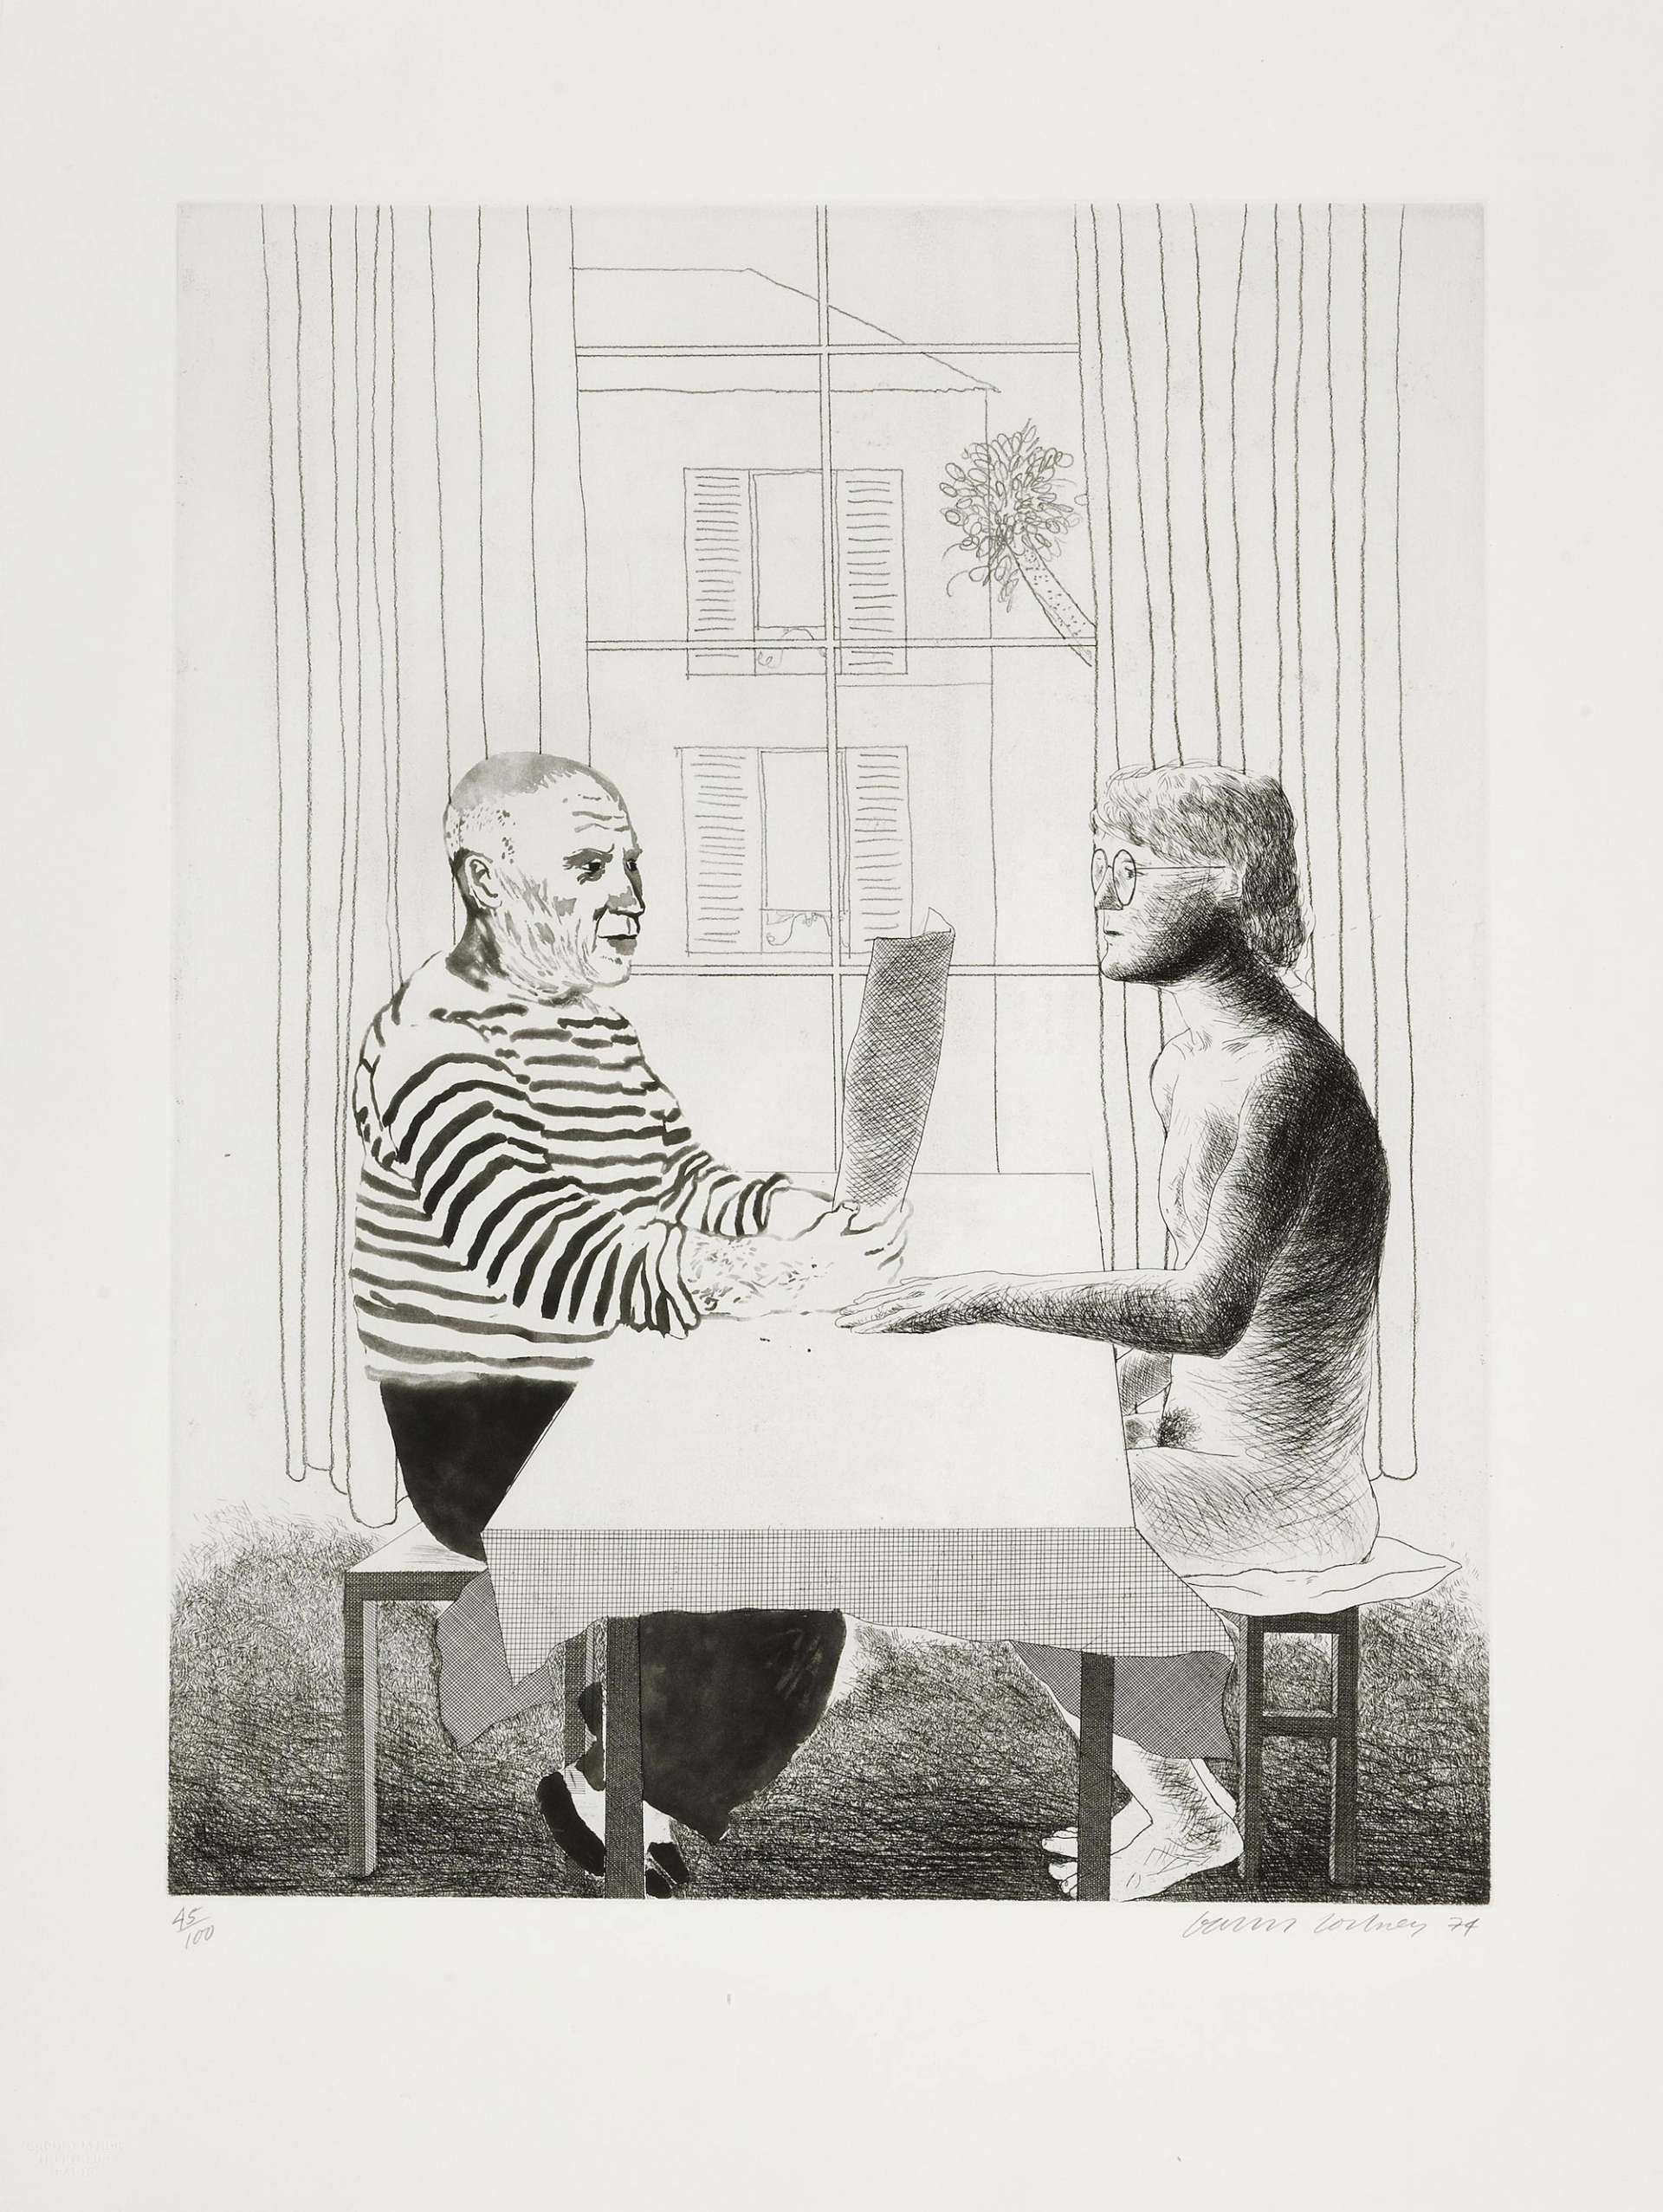 This print depicts the artist himself sat face-to-face with one of his greatest inspirations: Spanish artist Pablo Picasso. He is shown nude while Picasso is fully clothed in his signature breton shirt.